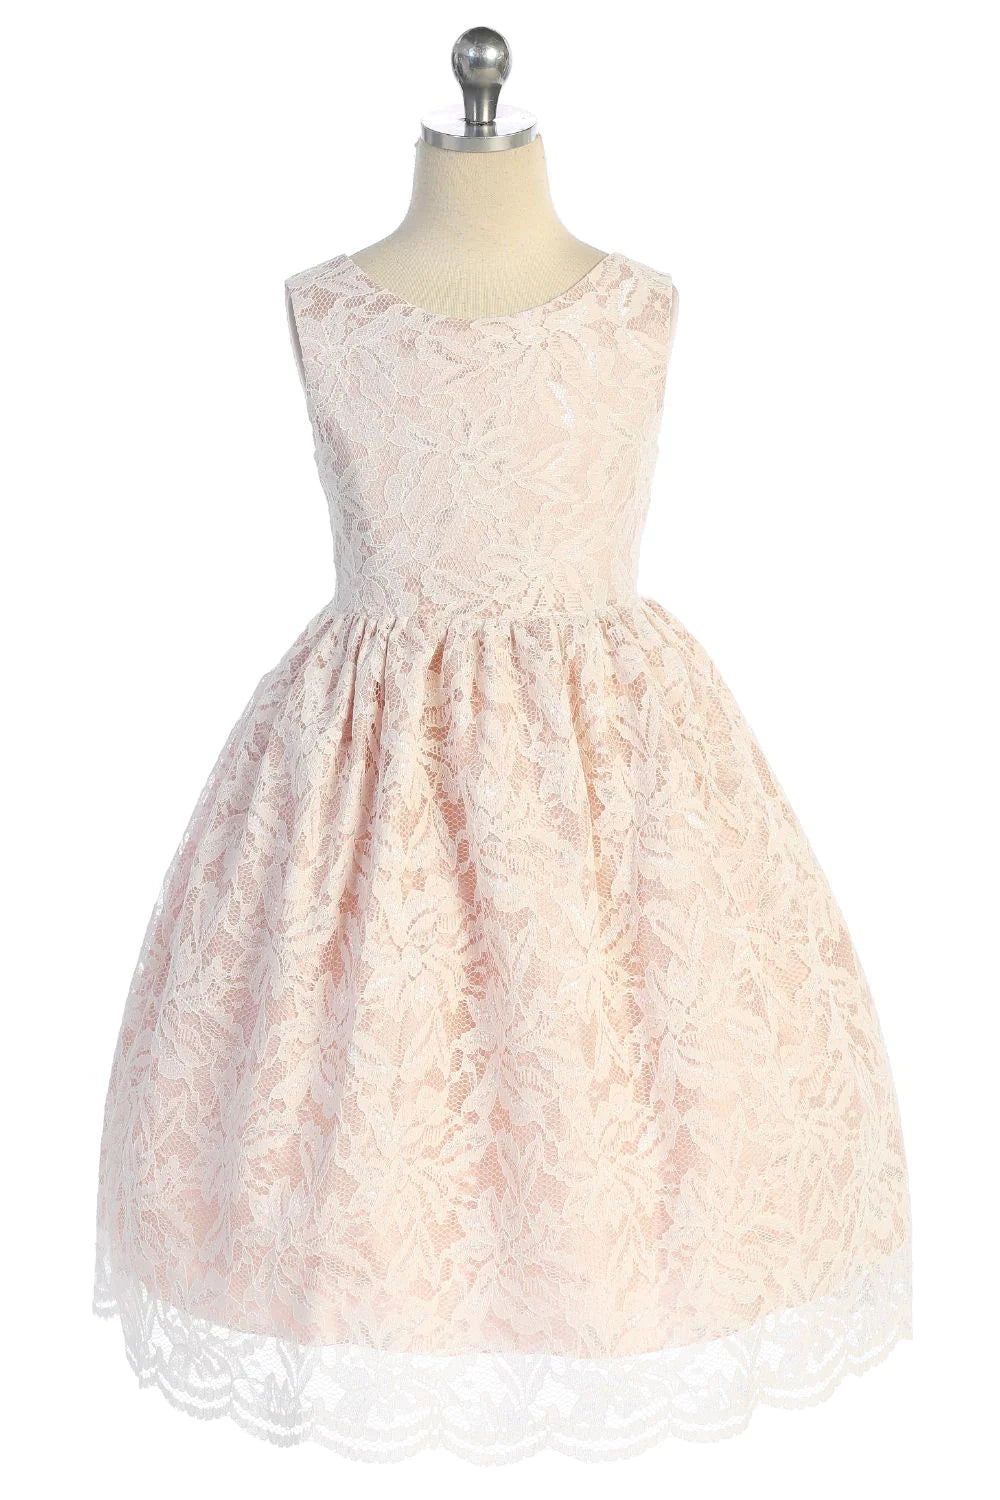 Lace V Back Bow Dress Off White/Blush by Kid's Dream